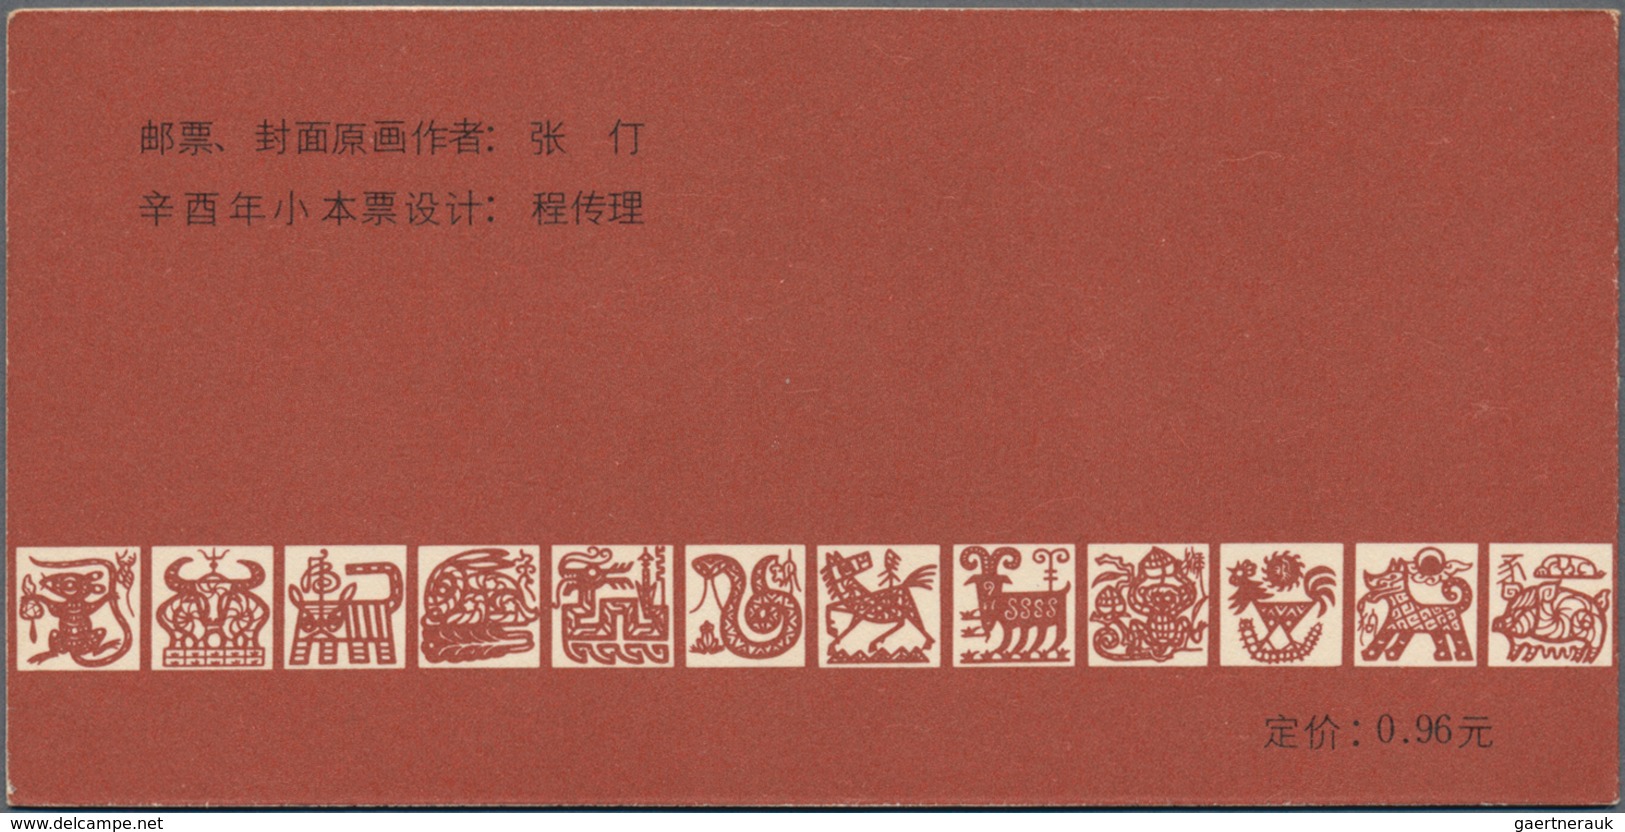 China - Volksrepublik: 1981, Year Of The Cock, Full Booklet MNH (Michel Cat. 300.-). - Lettres & Documents